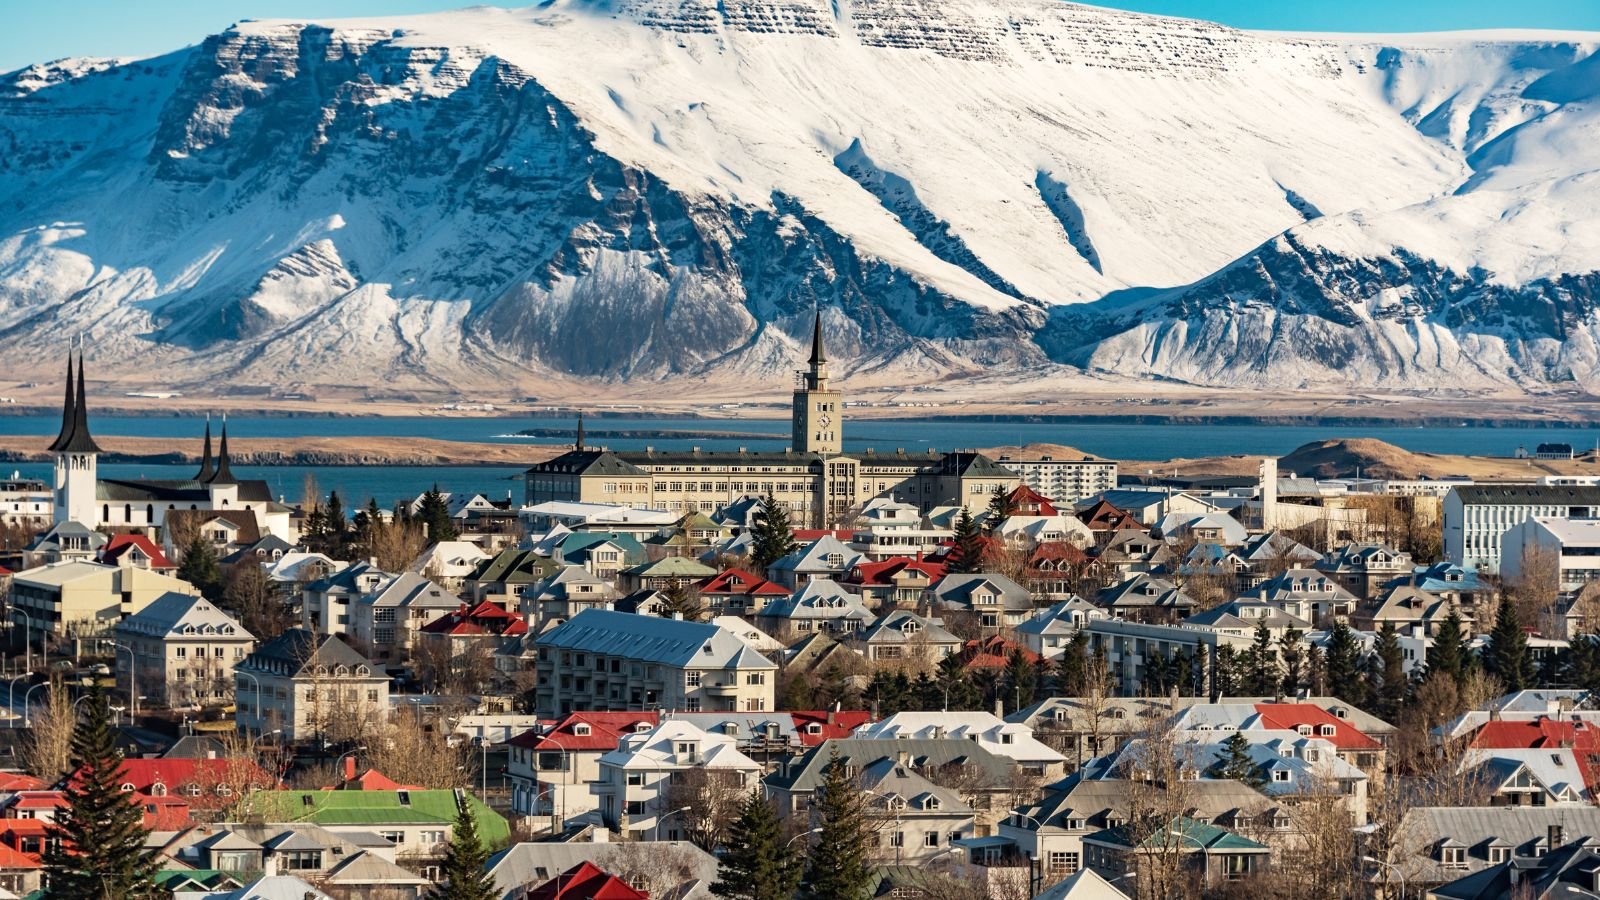 <p>This island nation experiences a strong sense of community and a social support system. Another important factor related to the happiness of Icelandic people is their culture of acceptance and equality.</p>